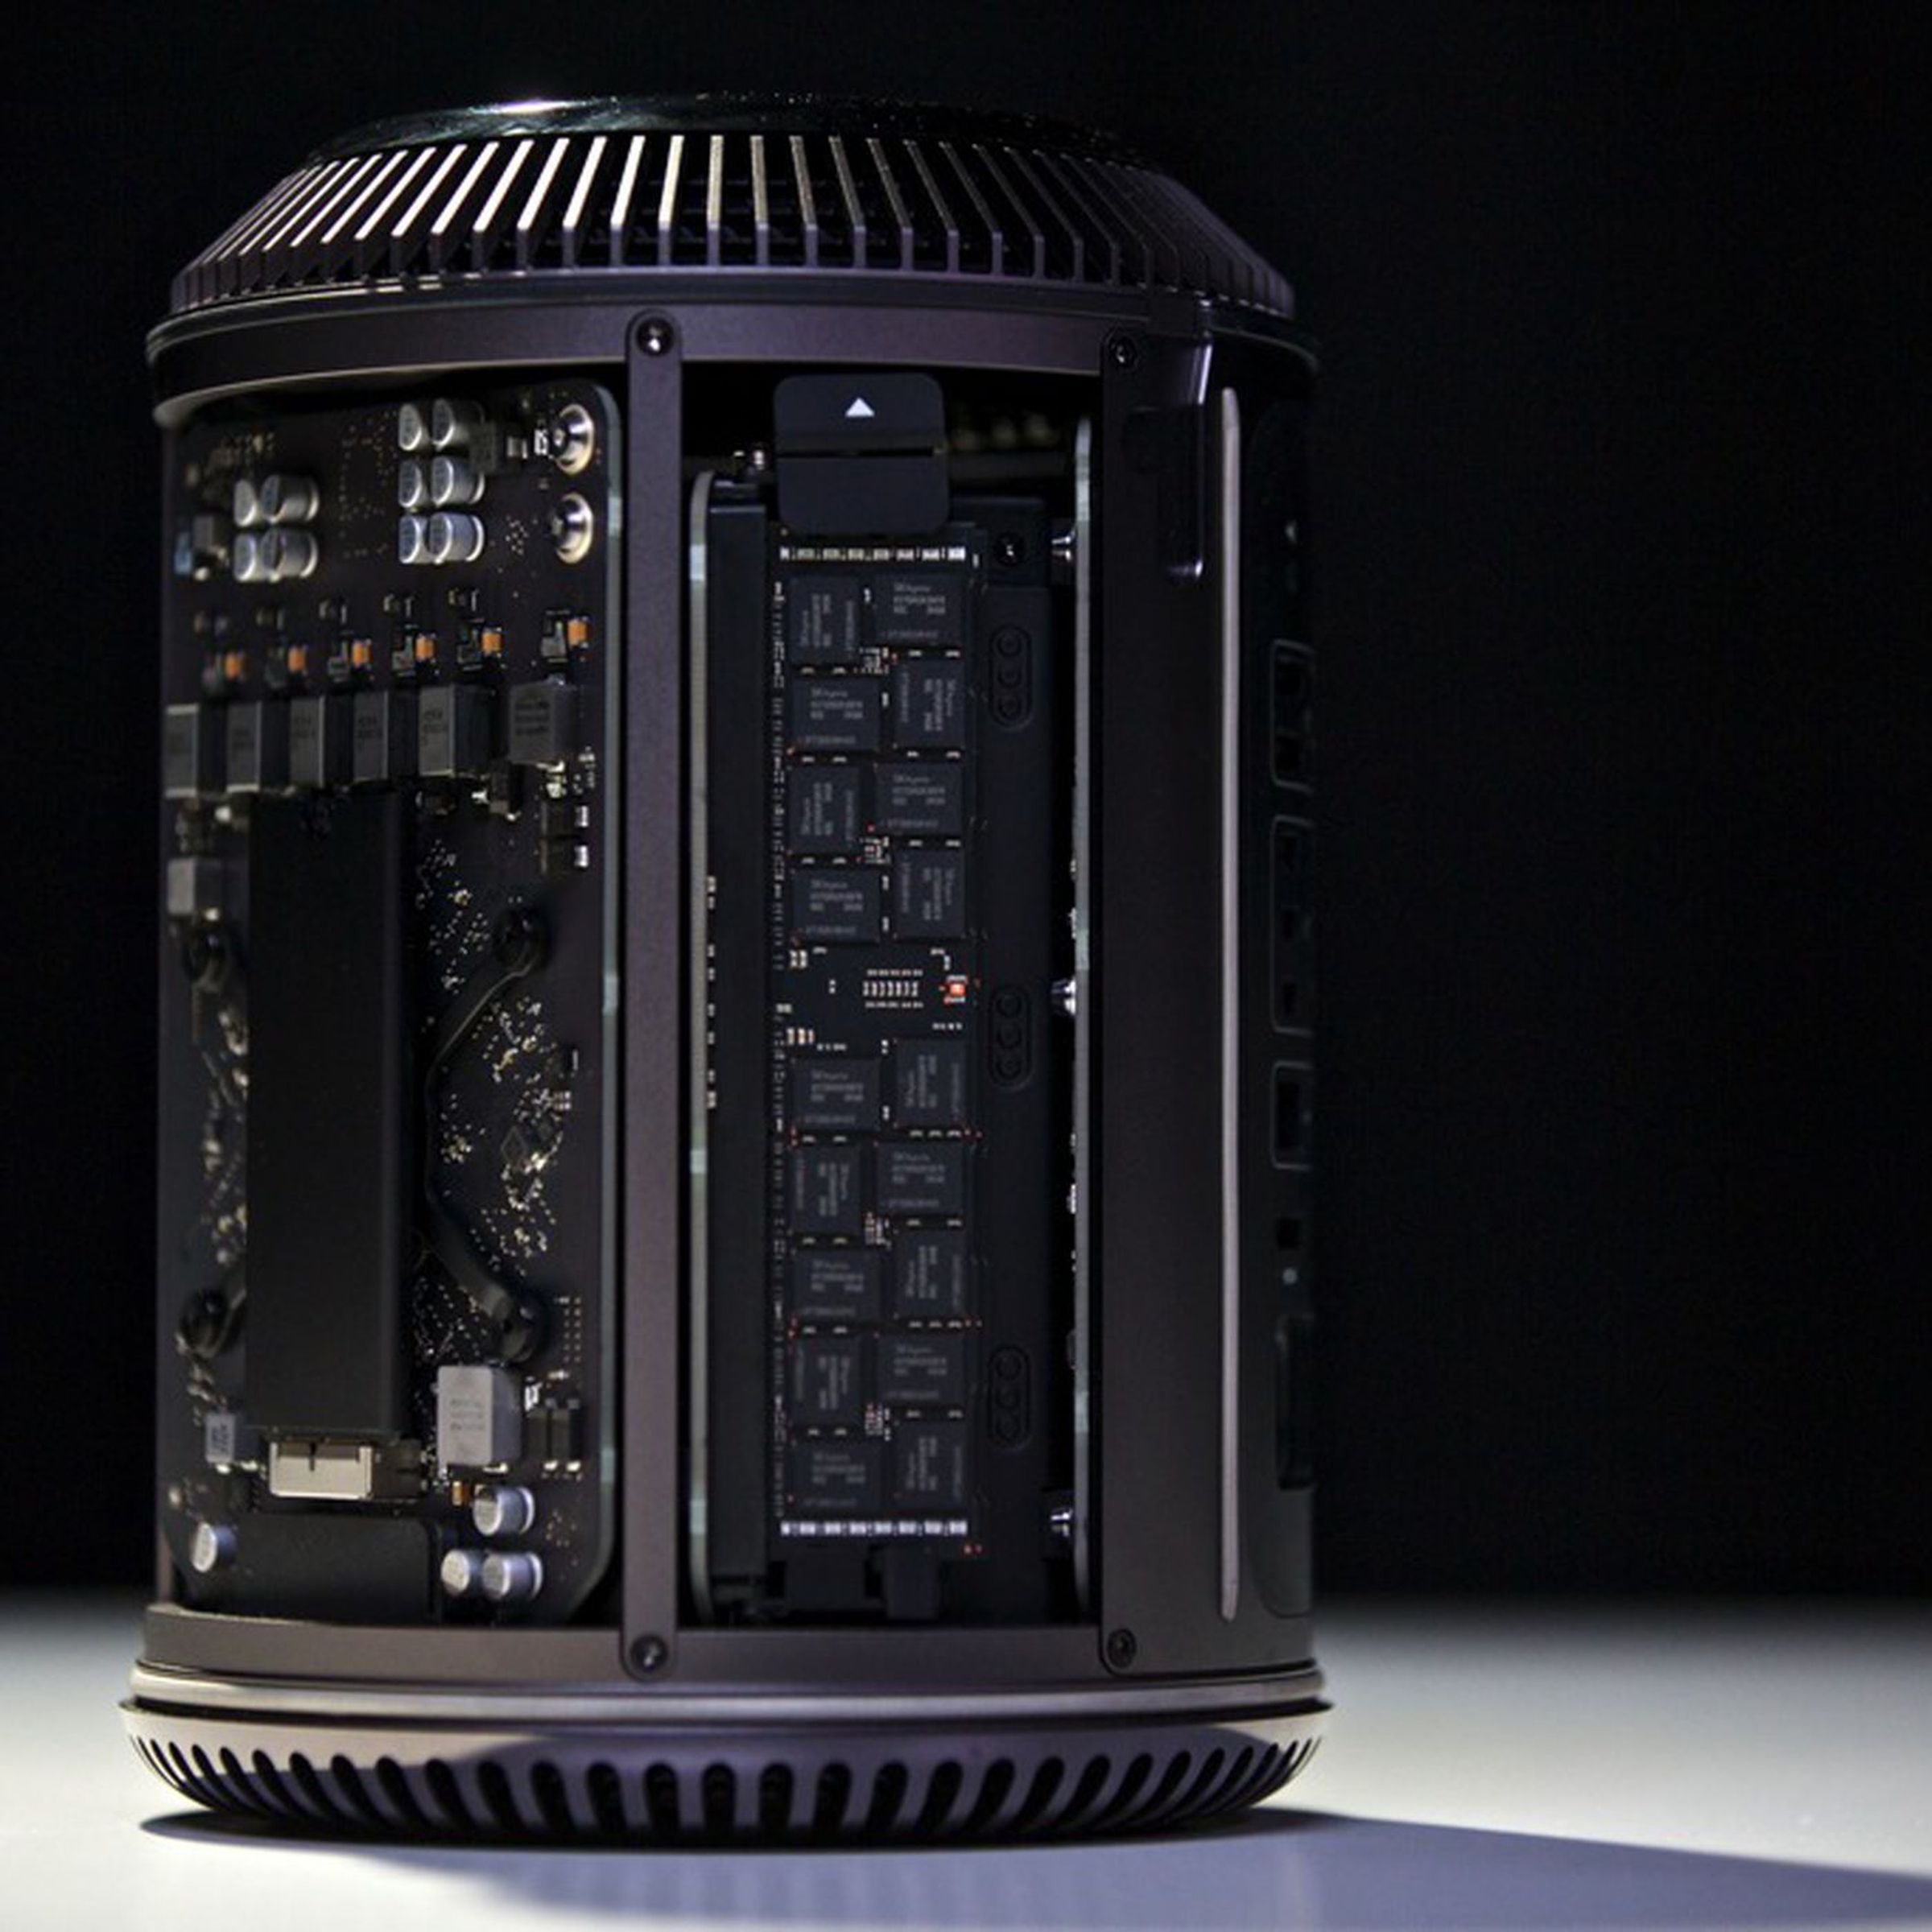 A picture of the 2013 Mac Pro sitting on a table without its cover, showing its innards, against a black background.